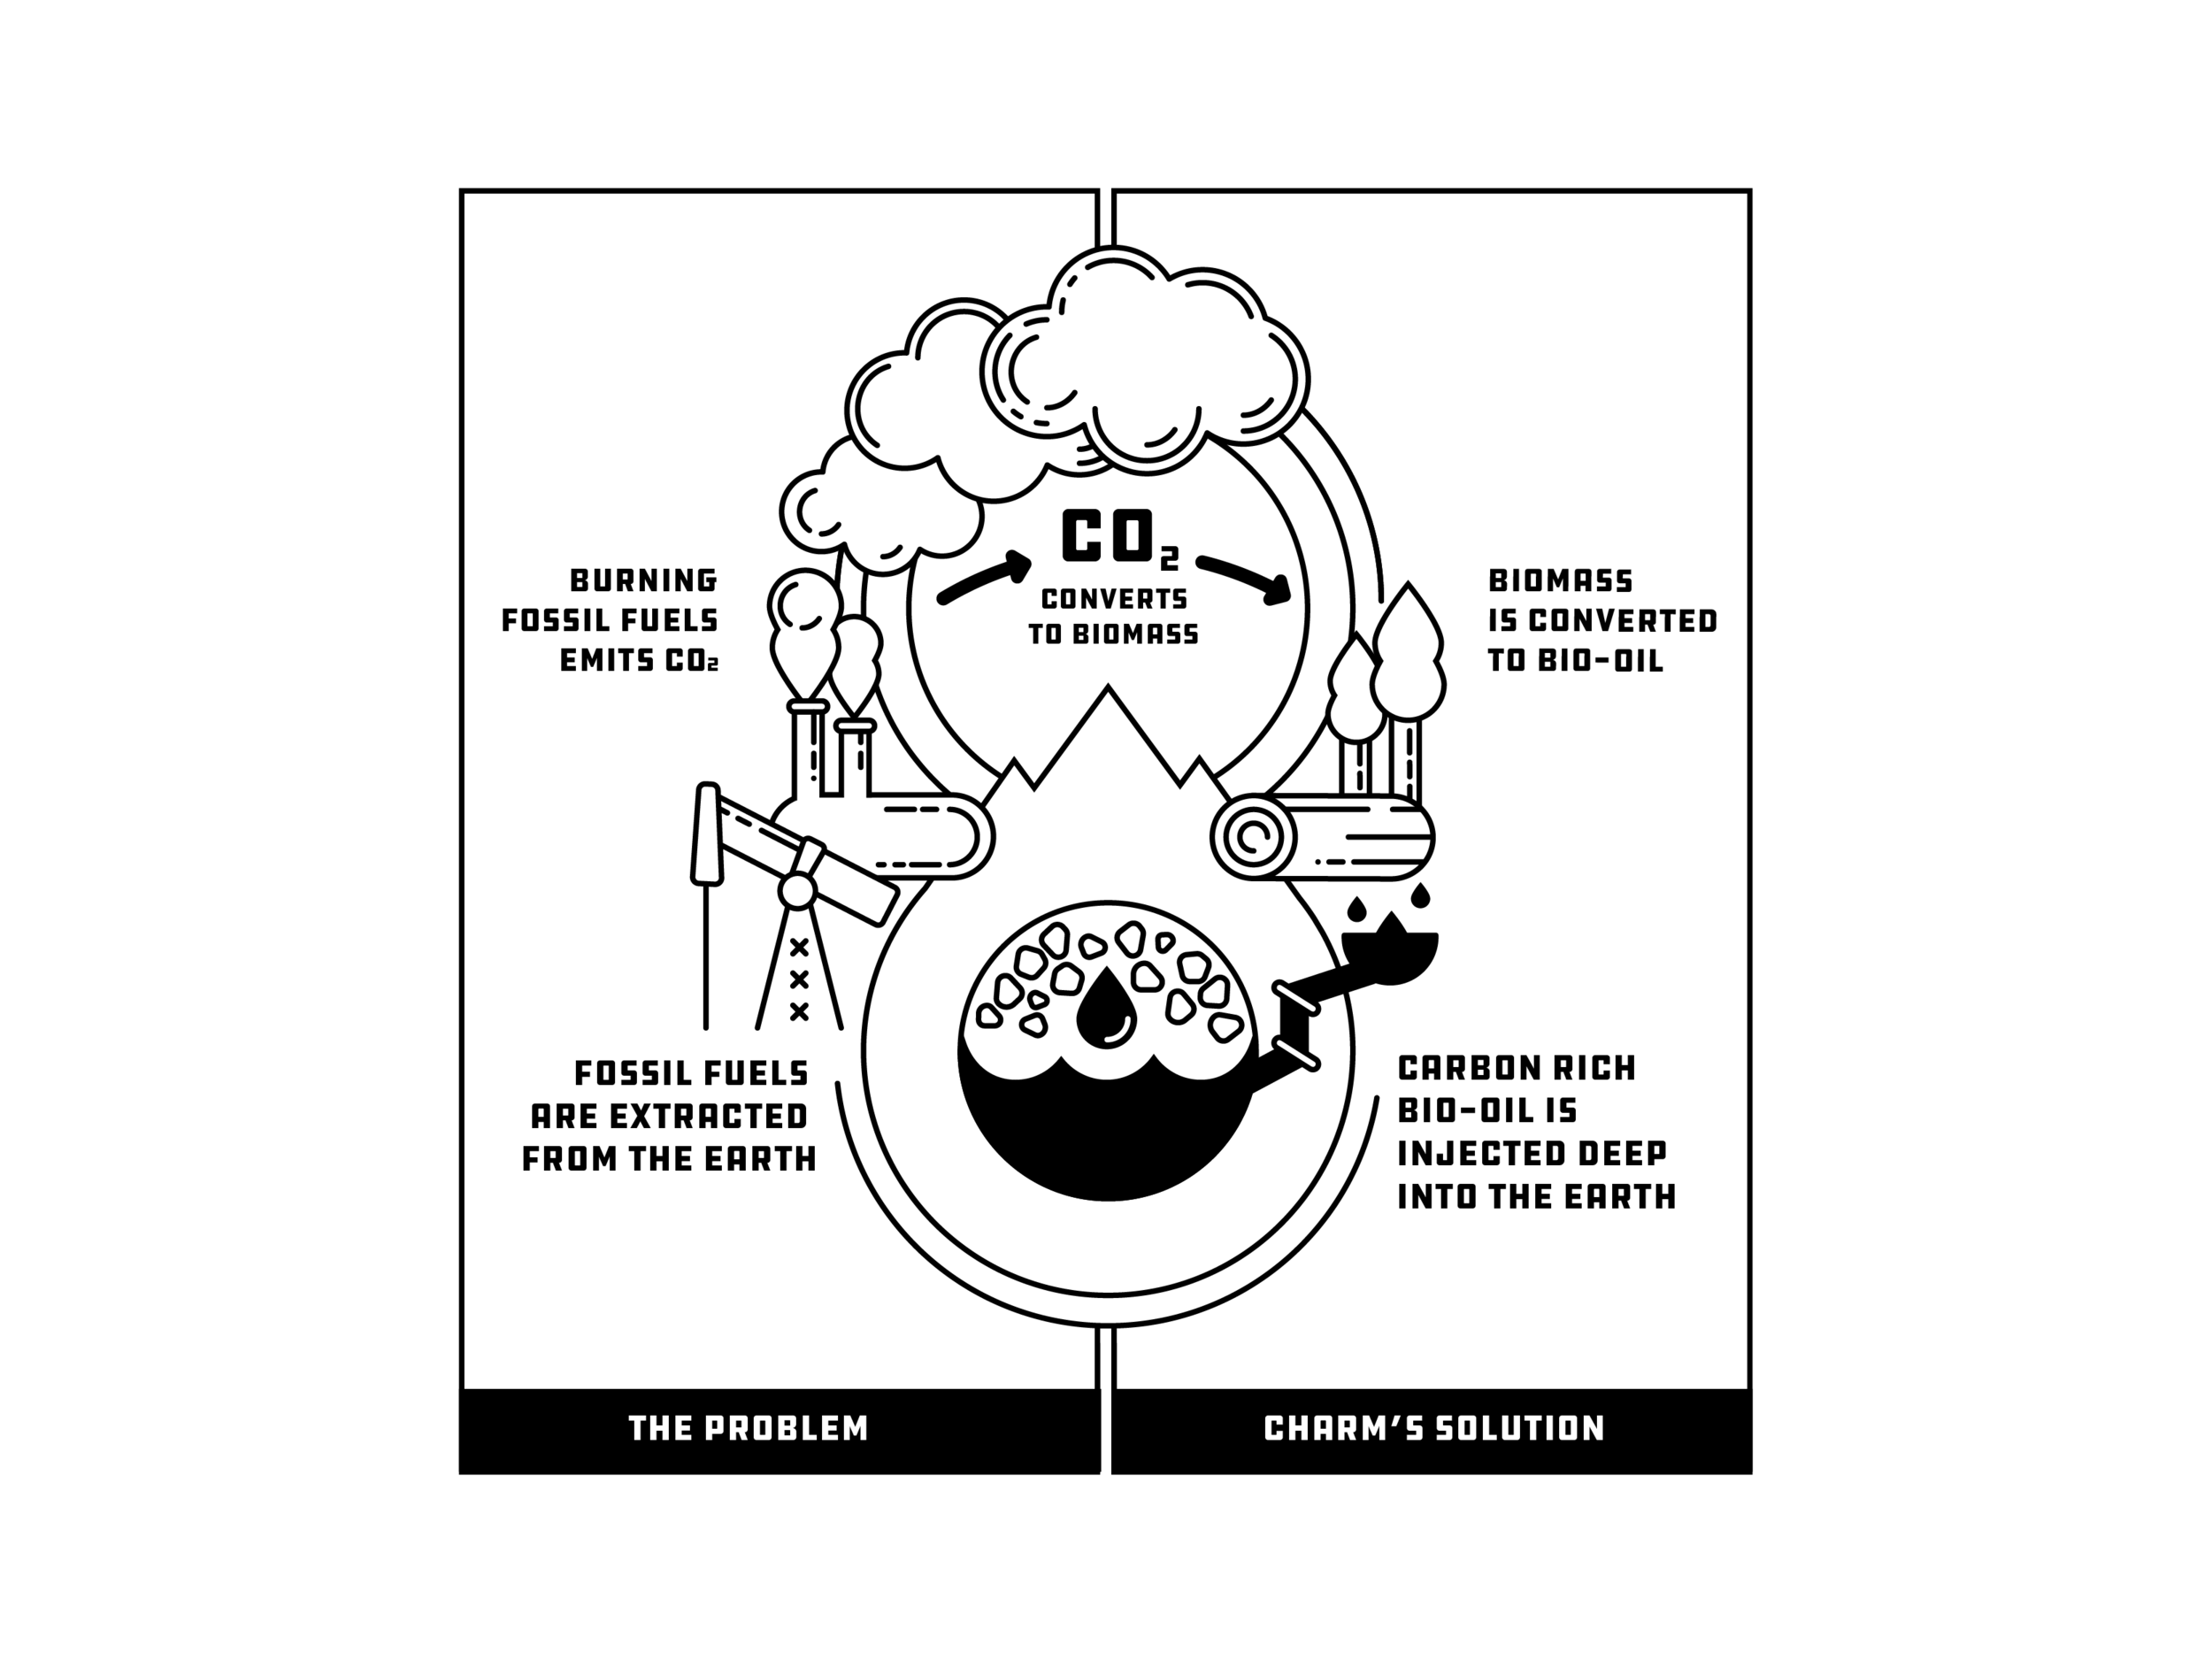 A New Negative Emissions Method and Our First Customer \u2014 Charm Industrial